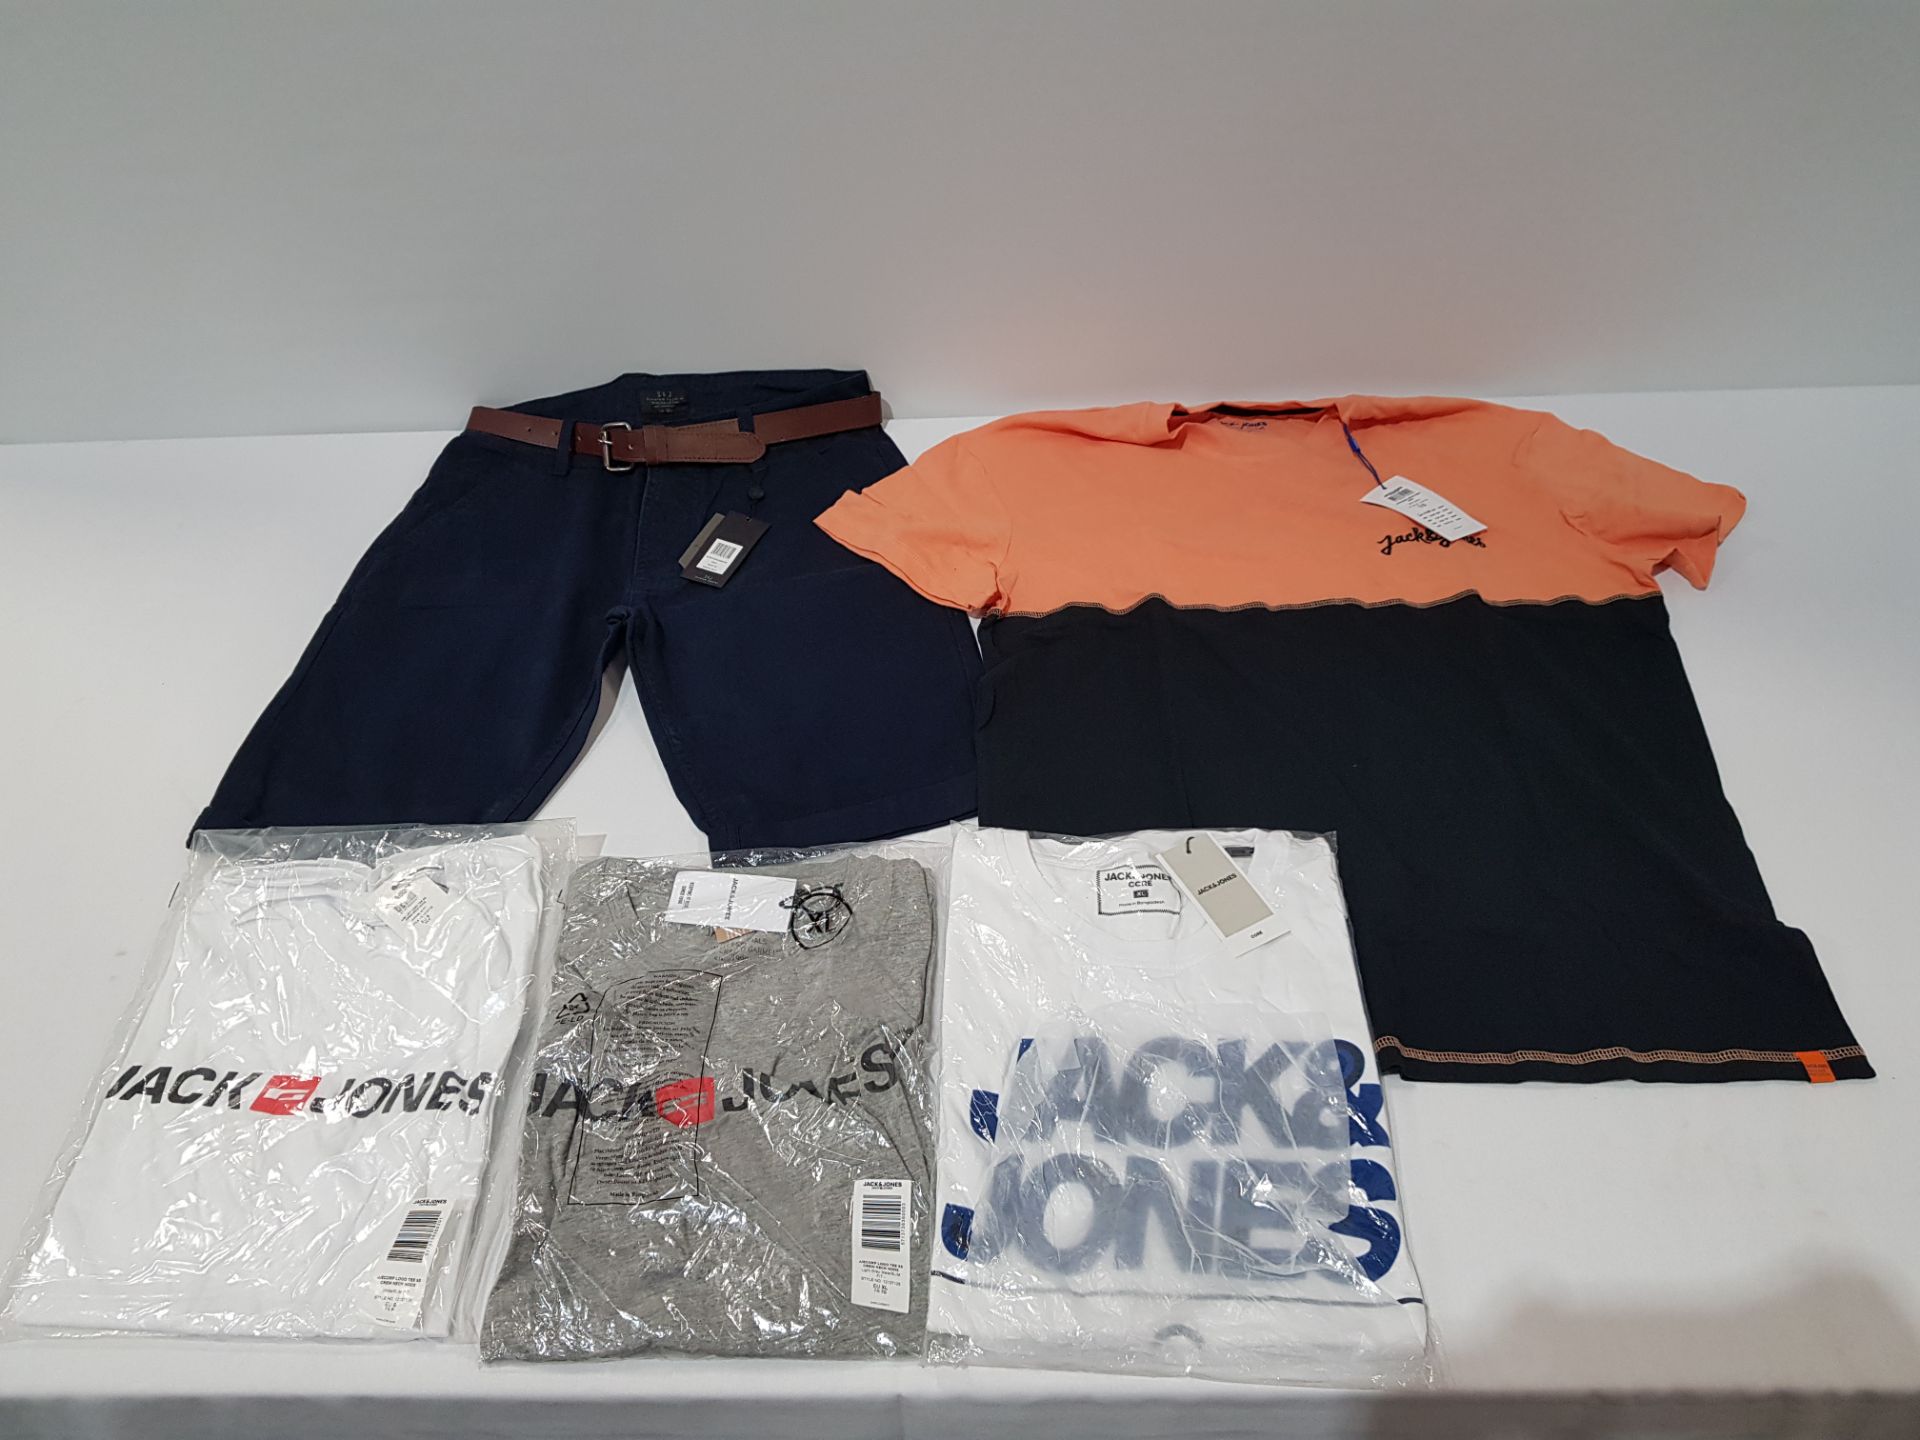 22 X BRAND NEW MIXED LOT CONTAINING 12 JACK AND JONES MIXED STYLES AND SIZES MENS T -SHIRTS, 10